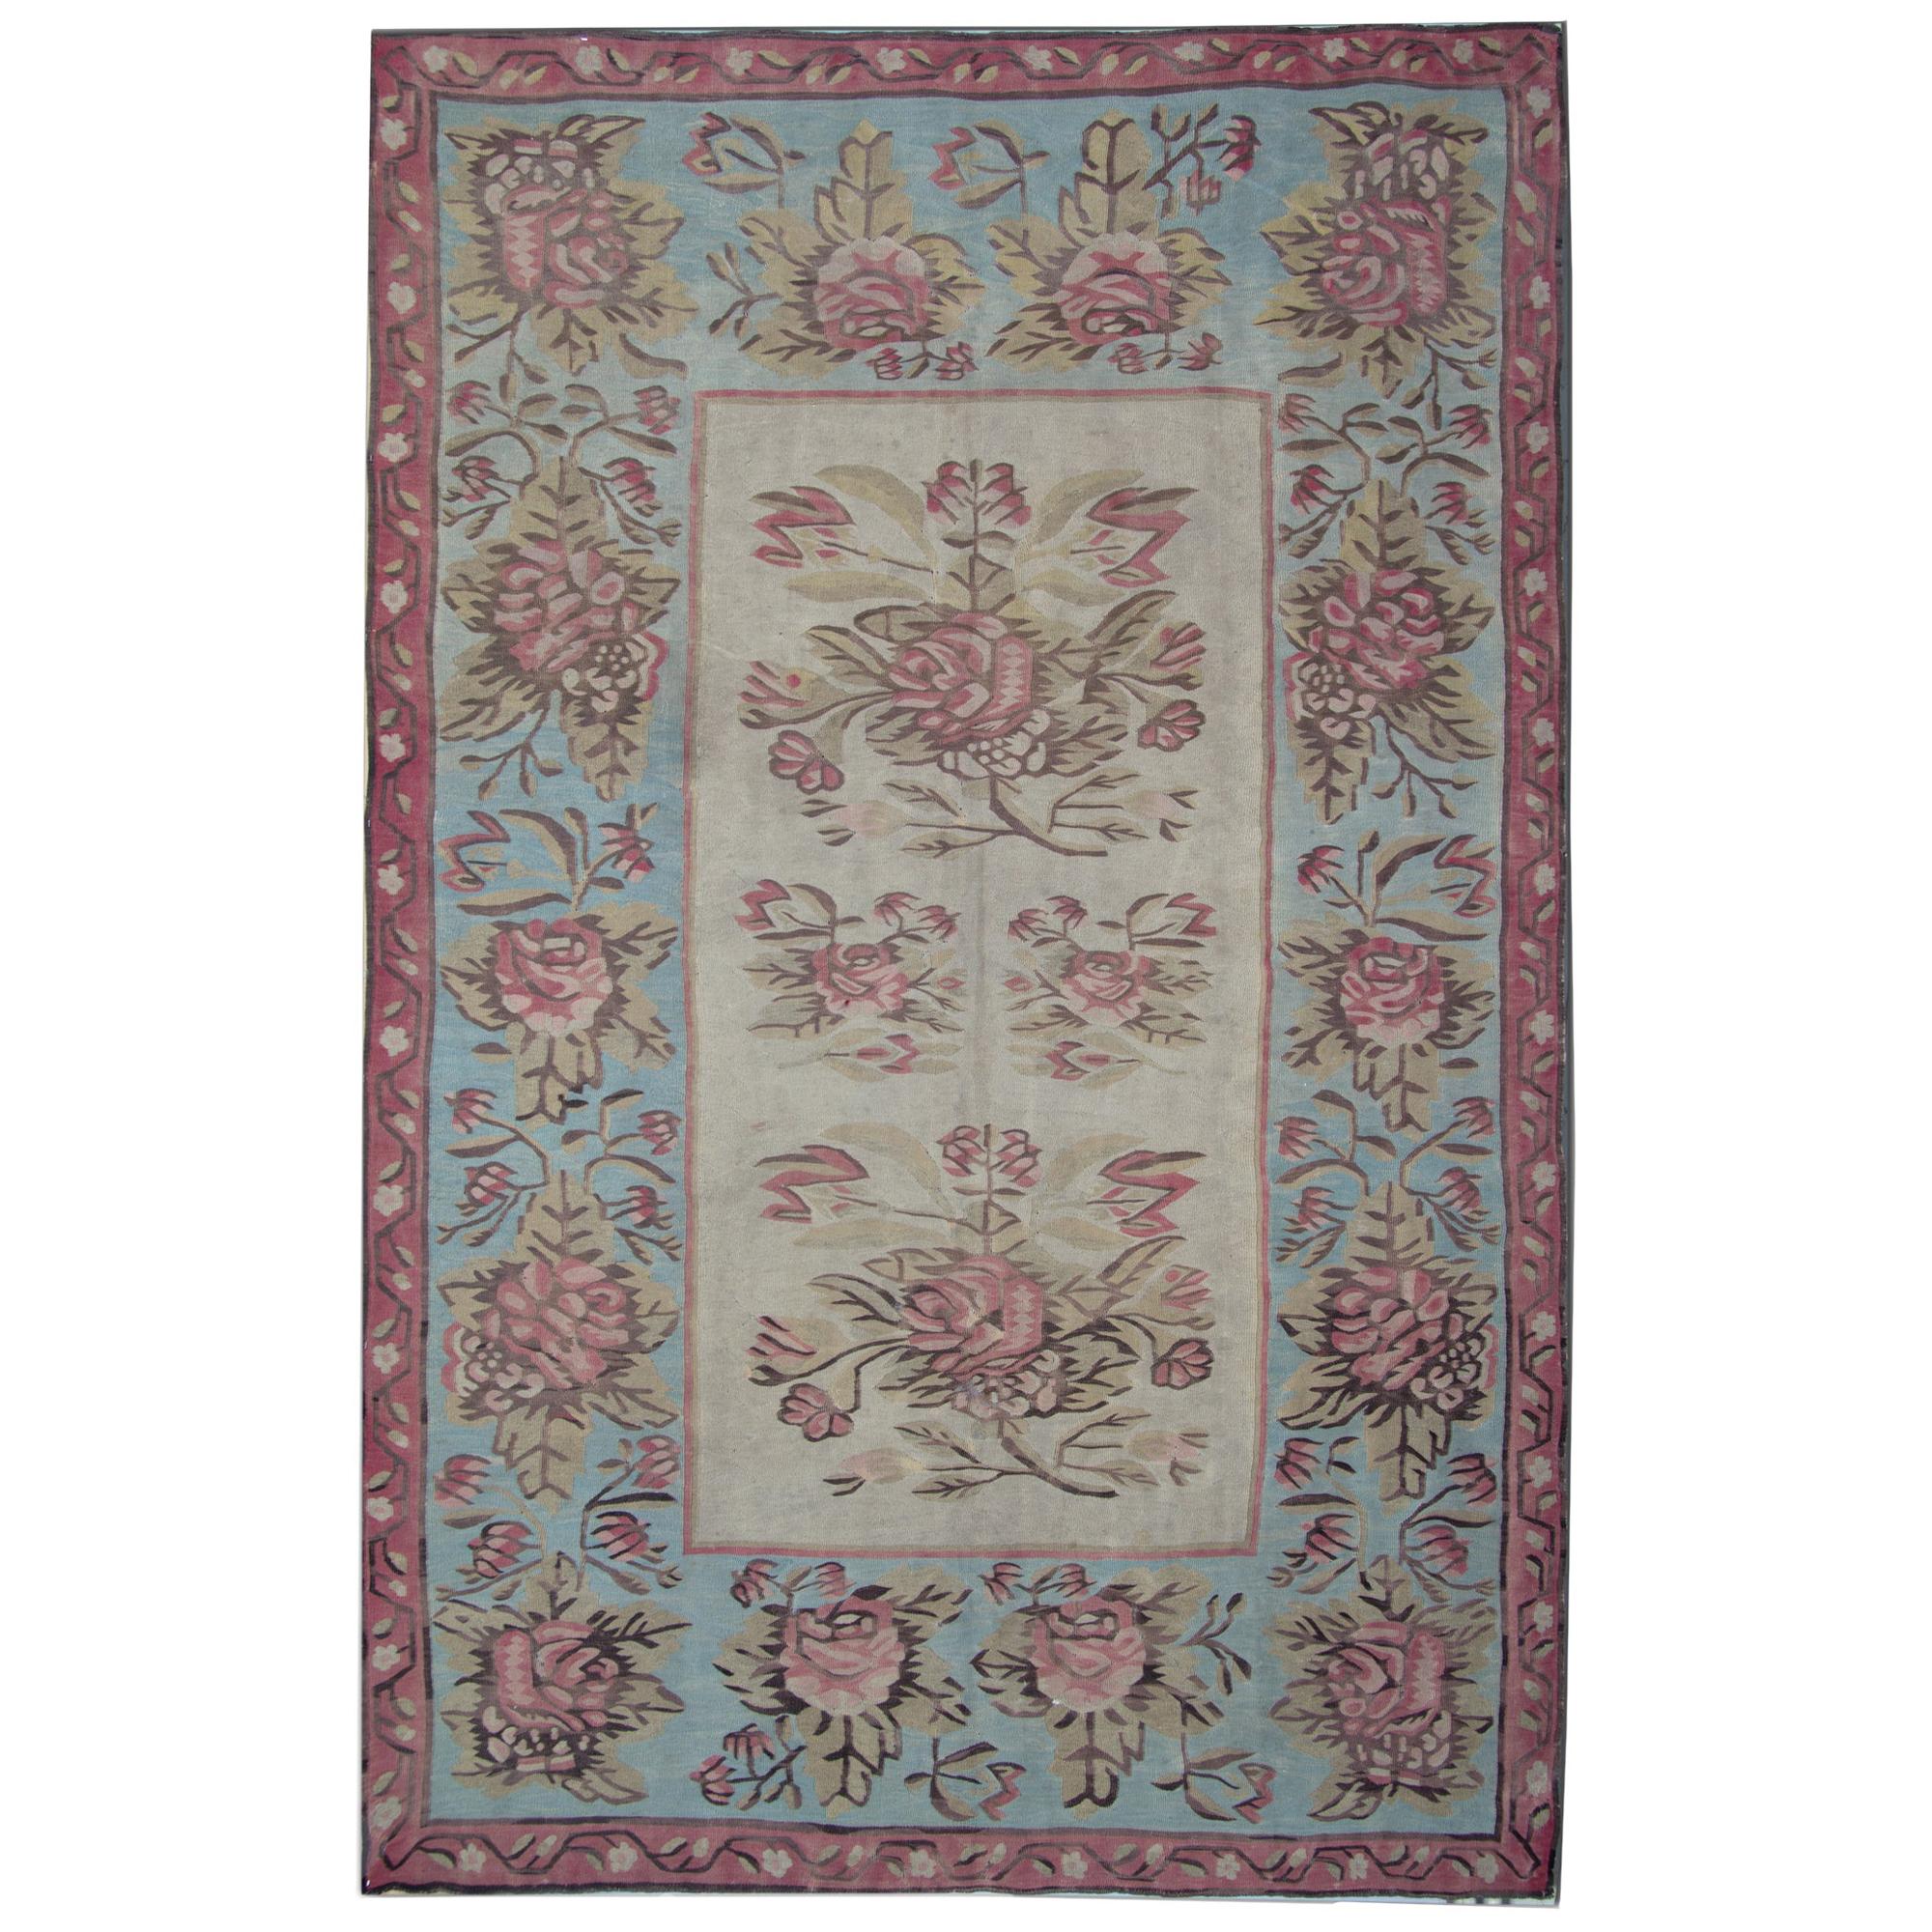 Antique Rugs, Rare Kilim Rugs from Bessarabia, Aubusson Rug, Sky Blue Area Rug